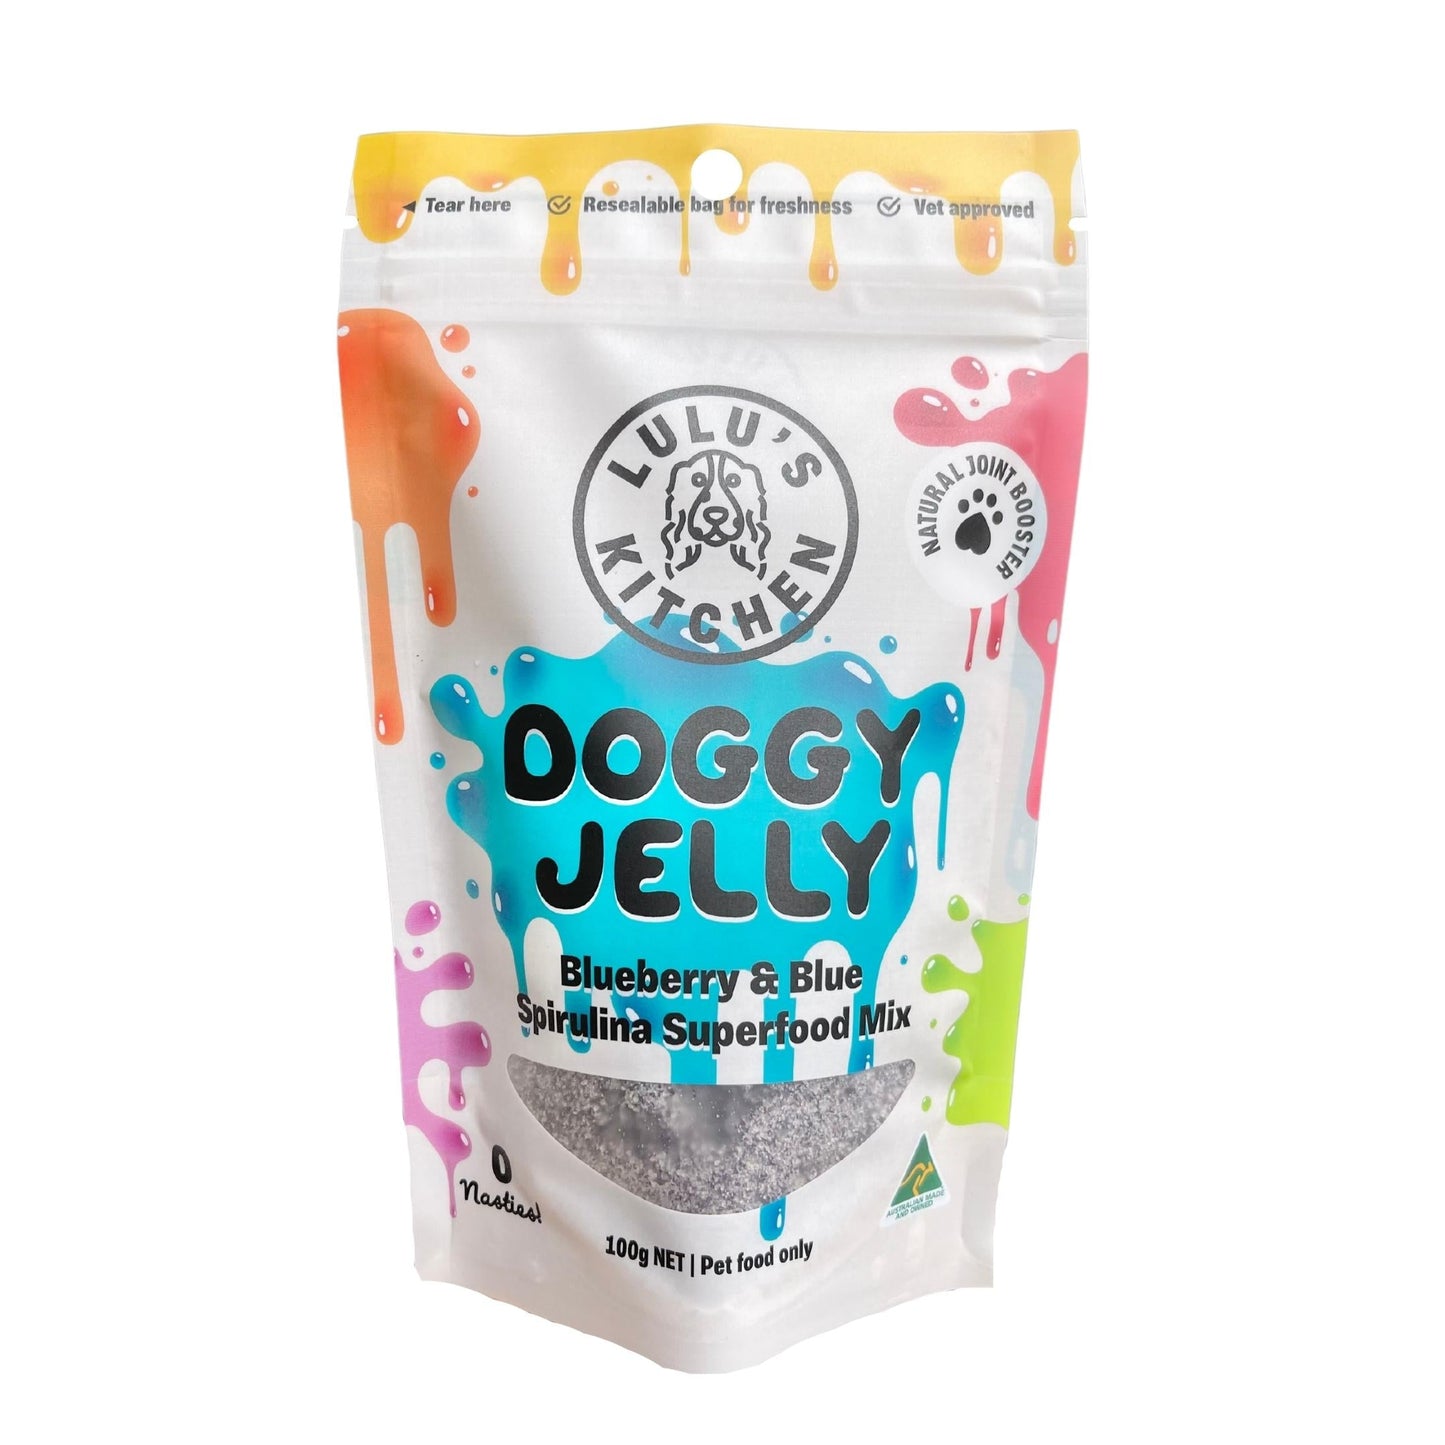 Doggy jelly - jelly for dogs blueberry